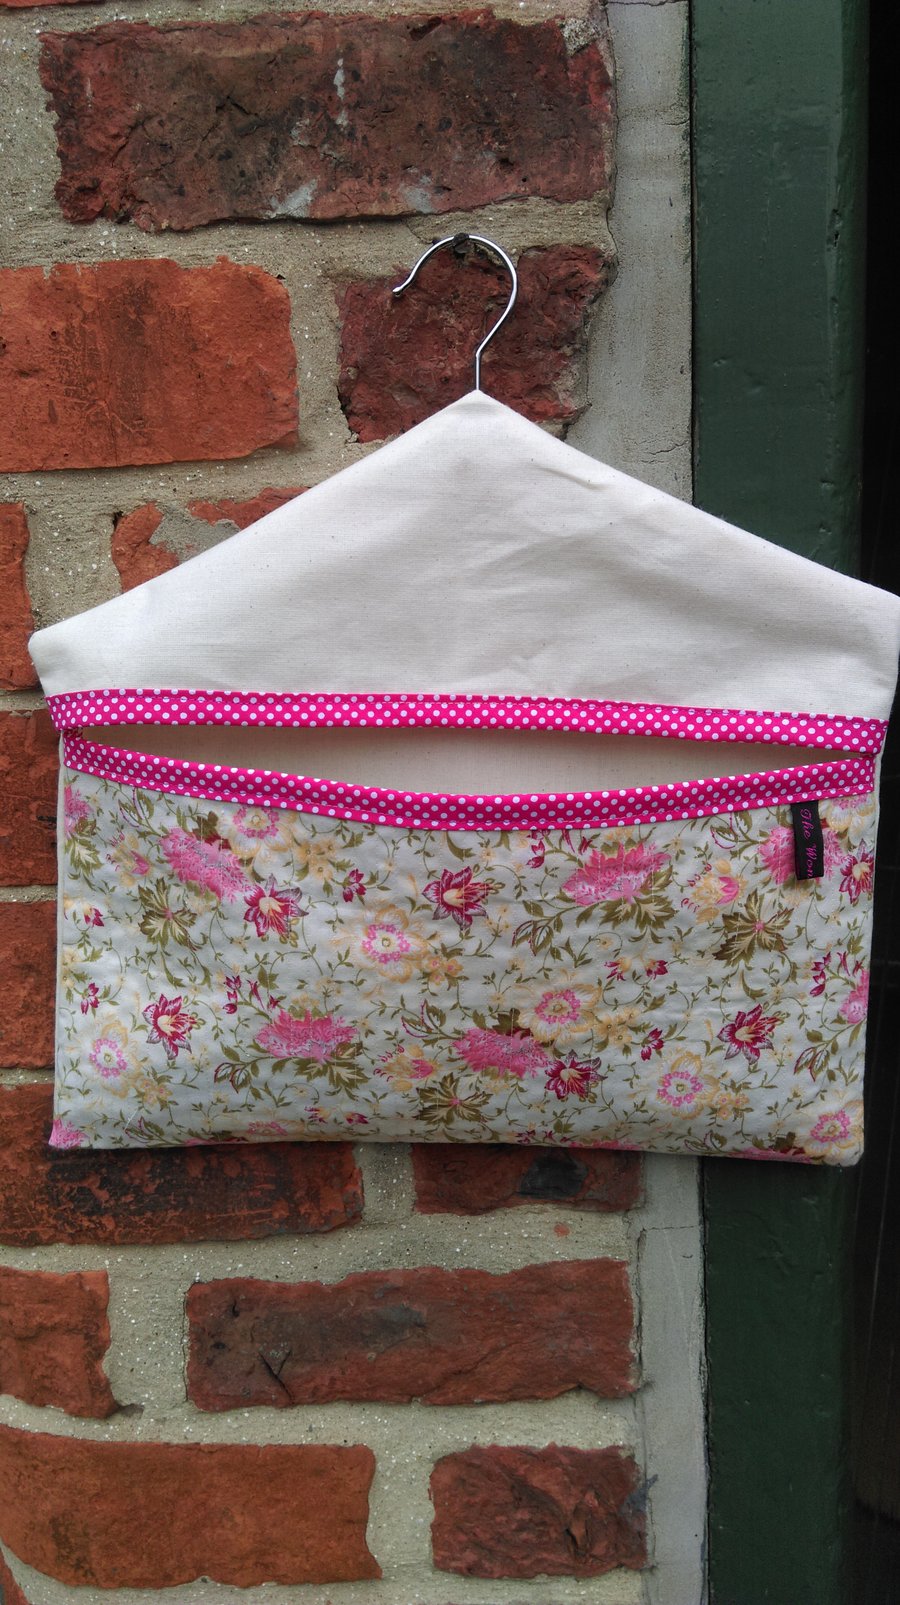 Floral 2 Quilted Multi Use Bag - Pegs, Car Tidy, Nappy Holder etc.